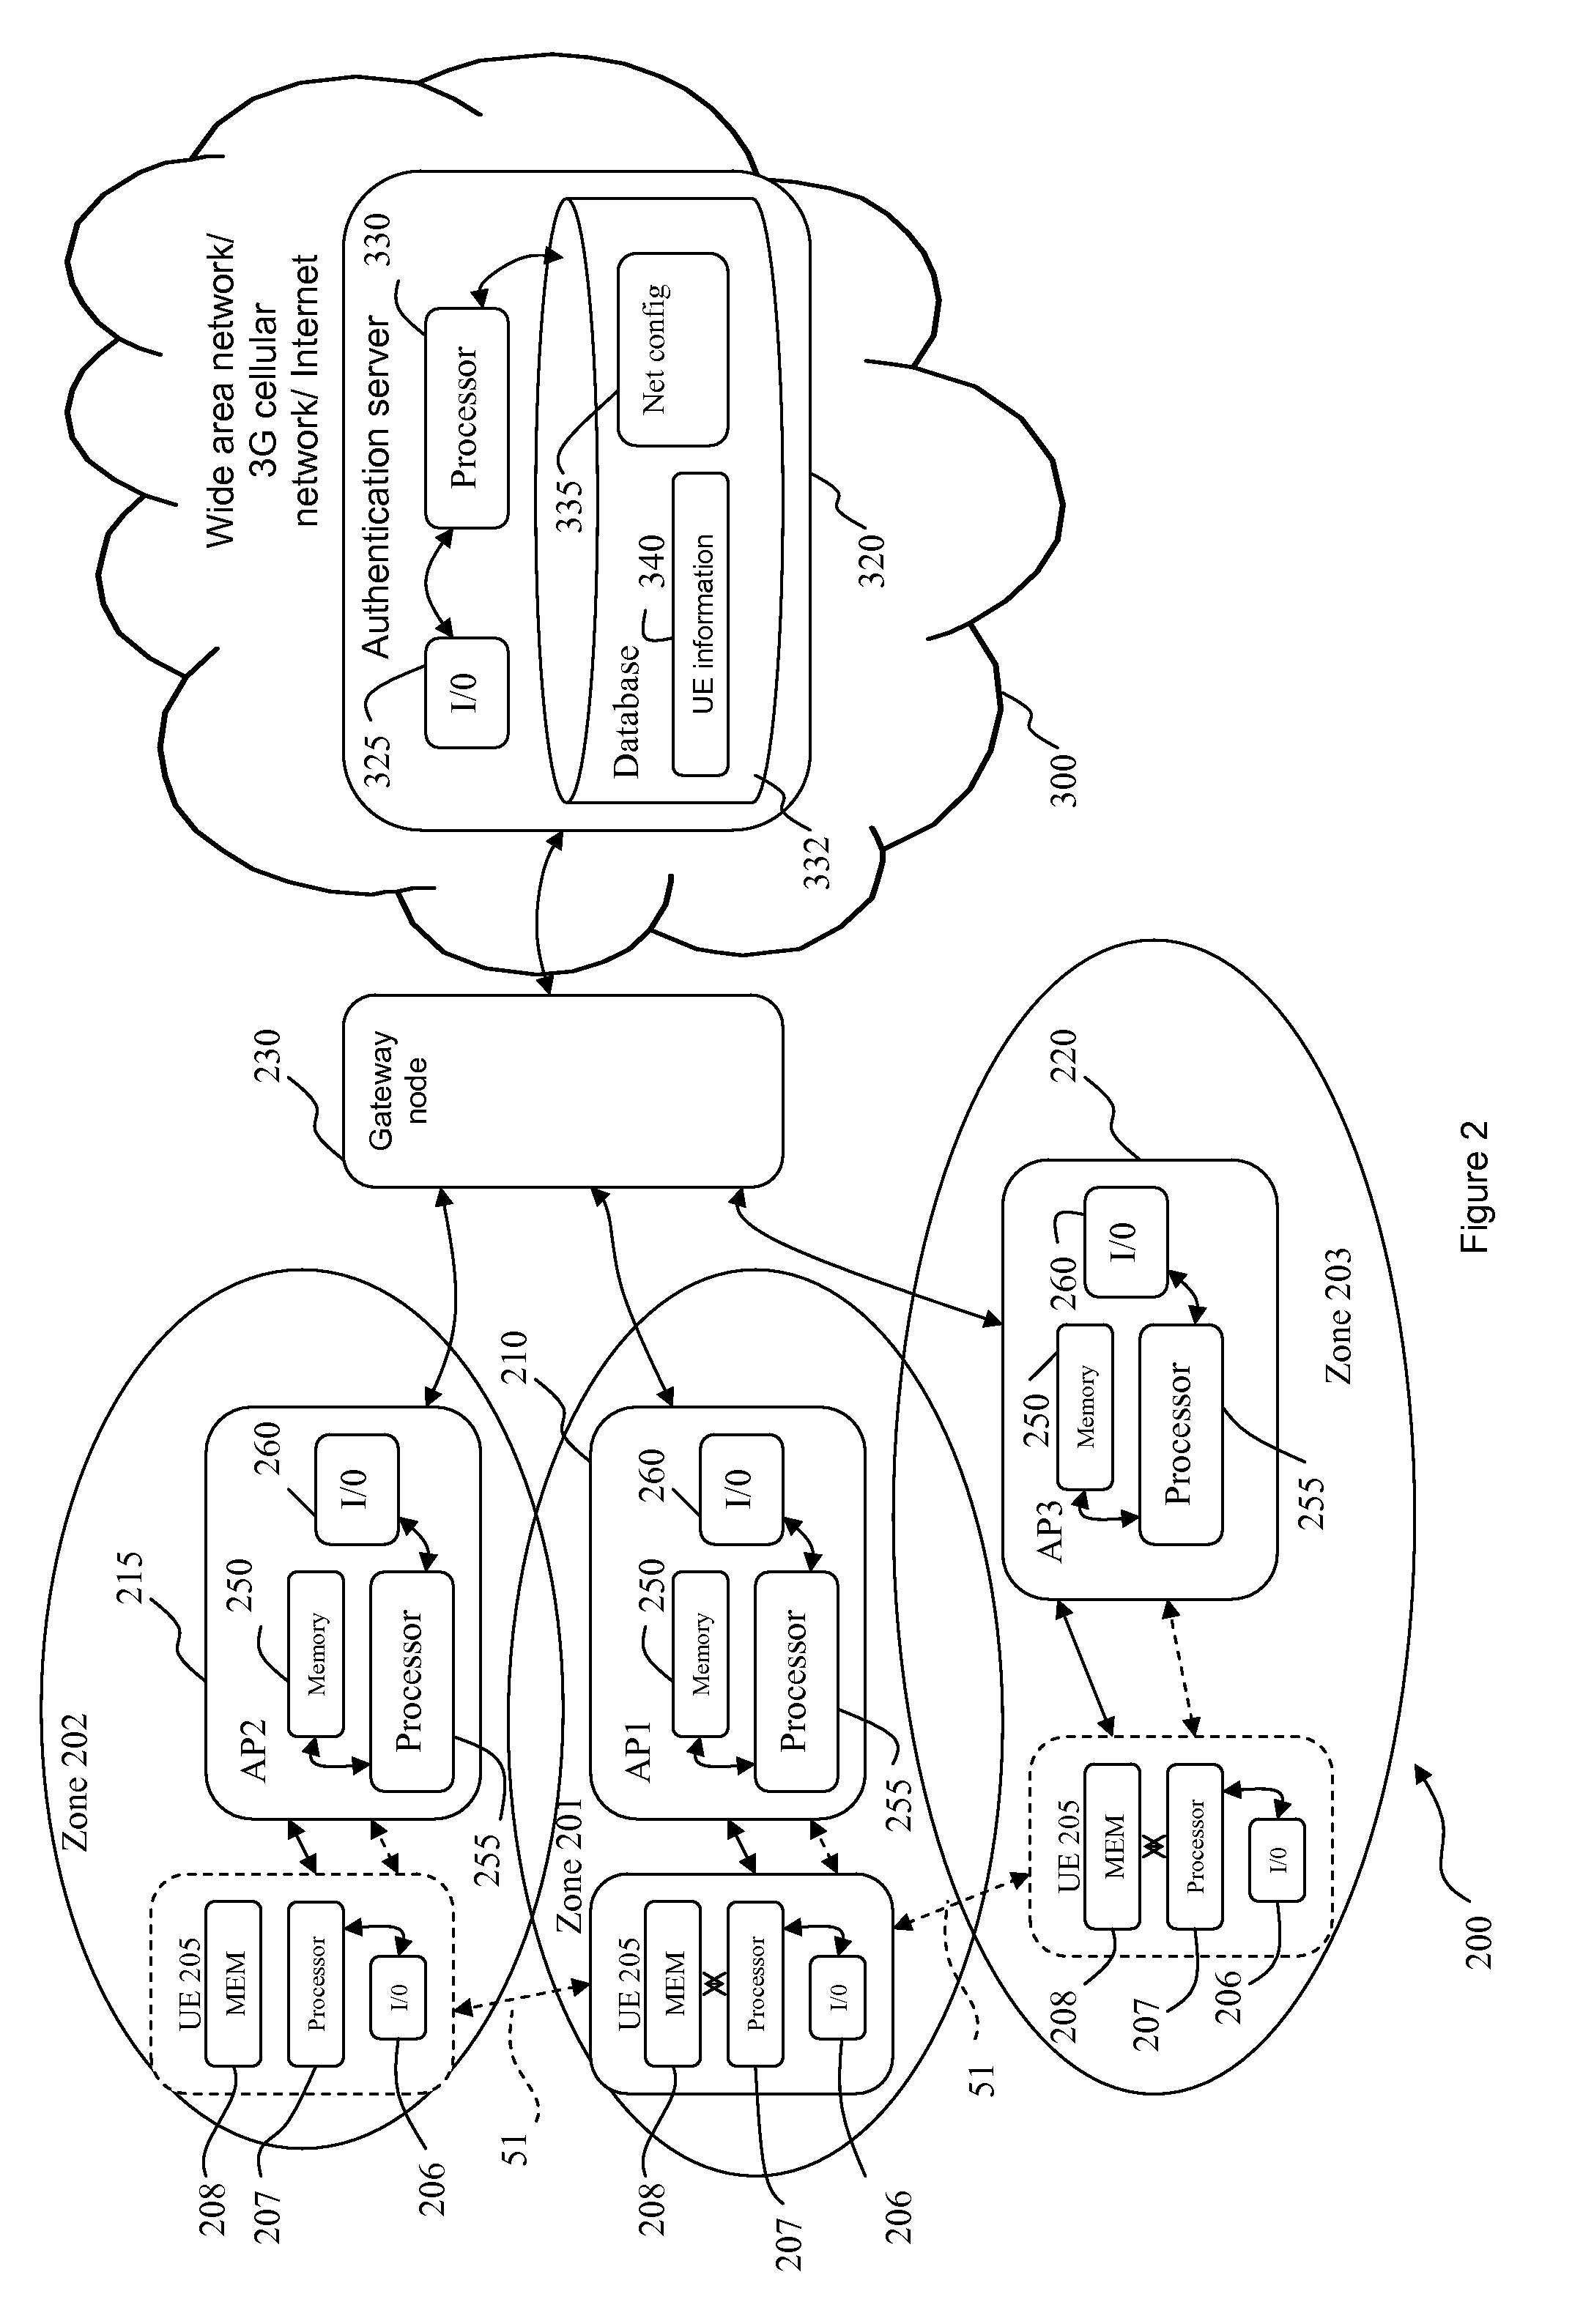 Method for fast handover and authentication in a packet data network